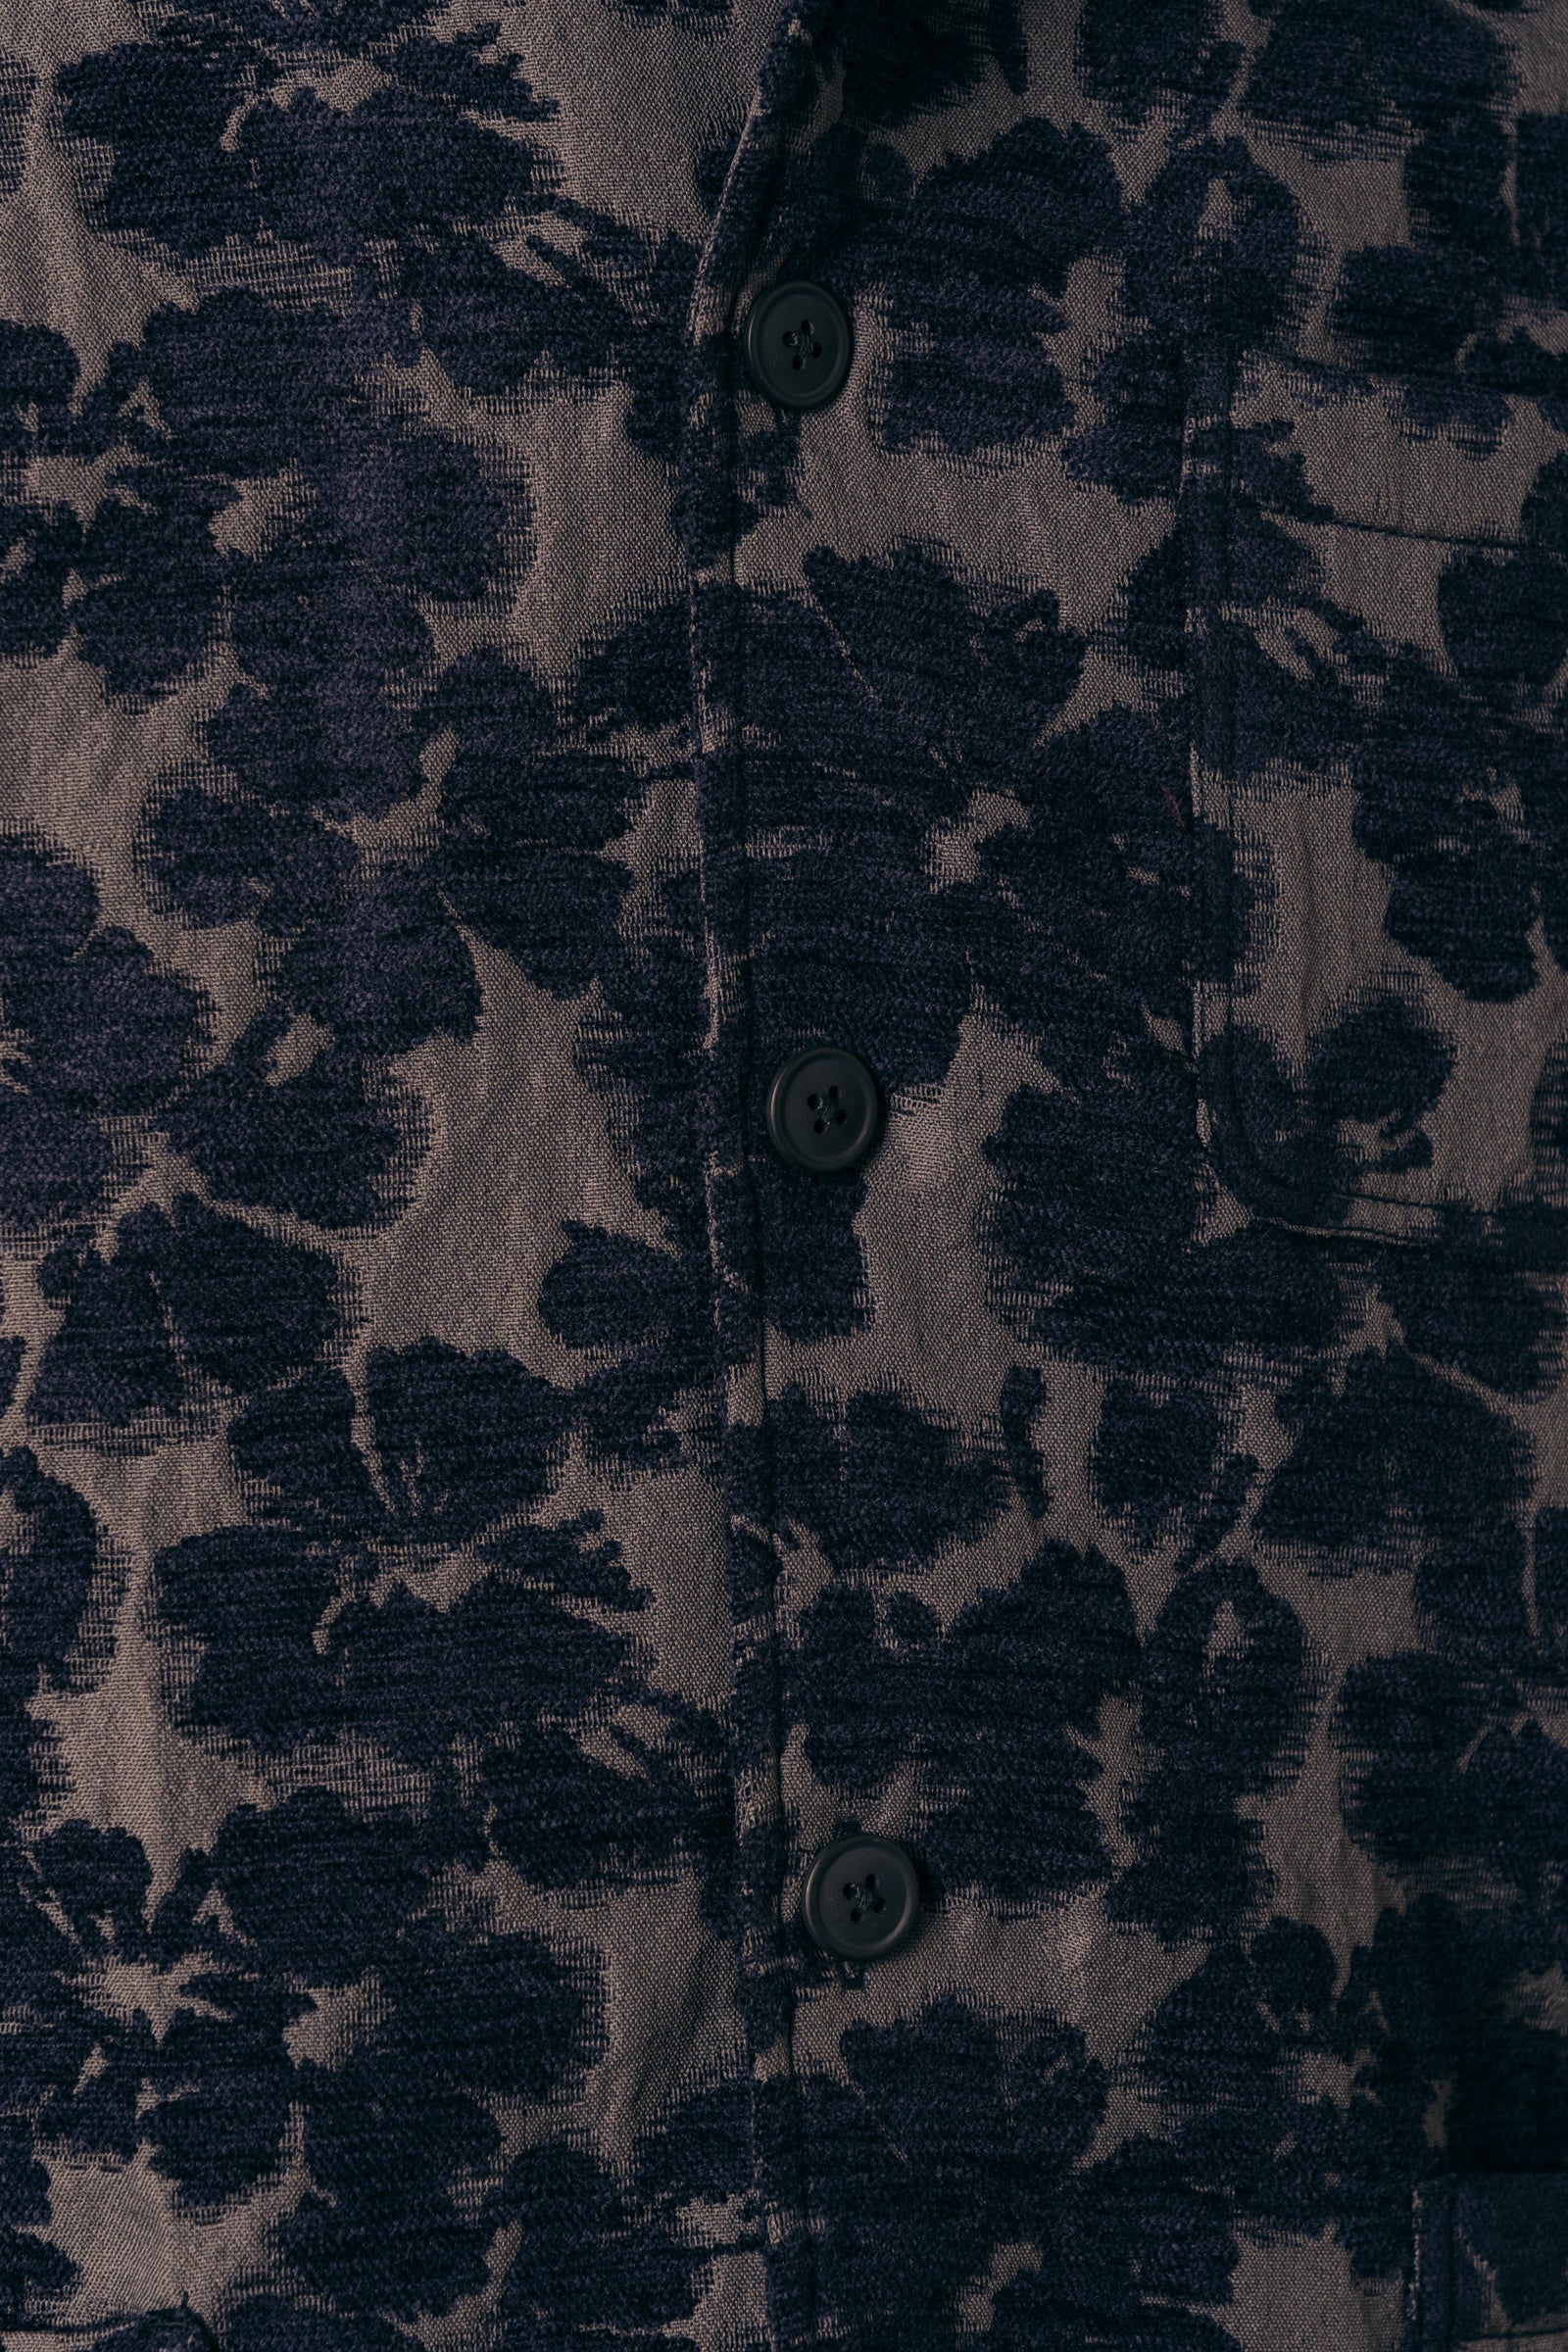 A Japanese Floral Jacquard fabric with Corozo buttons up the front.